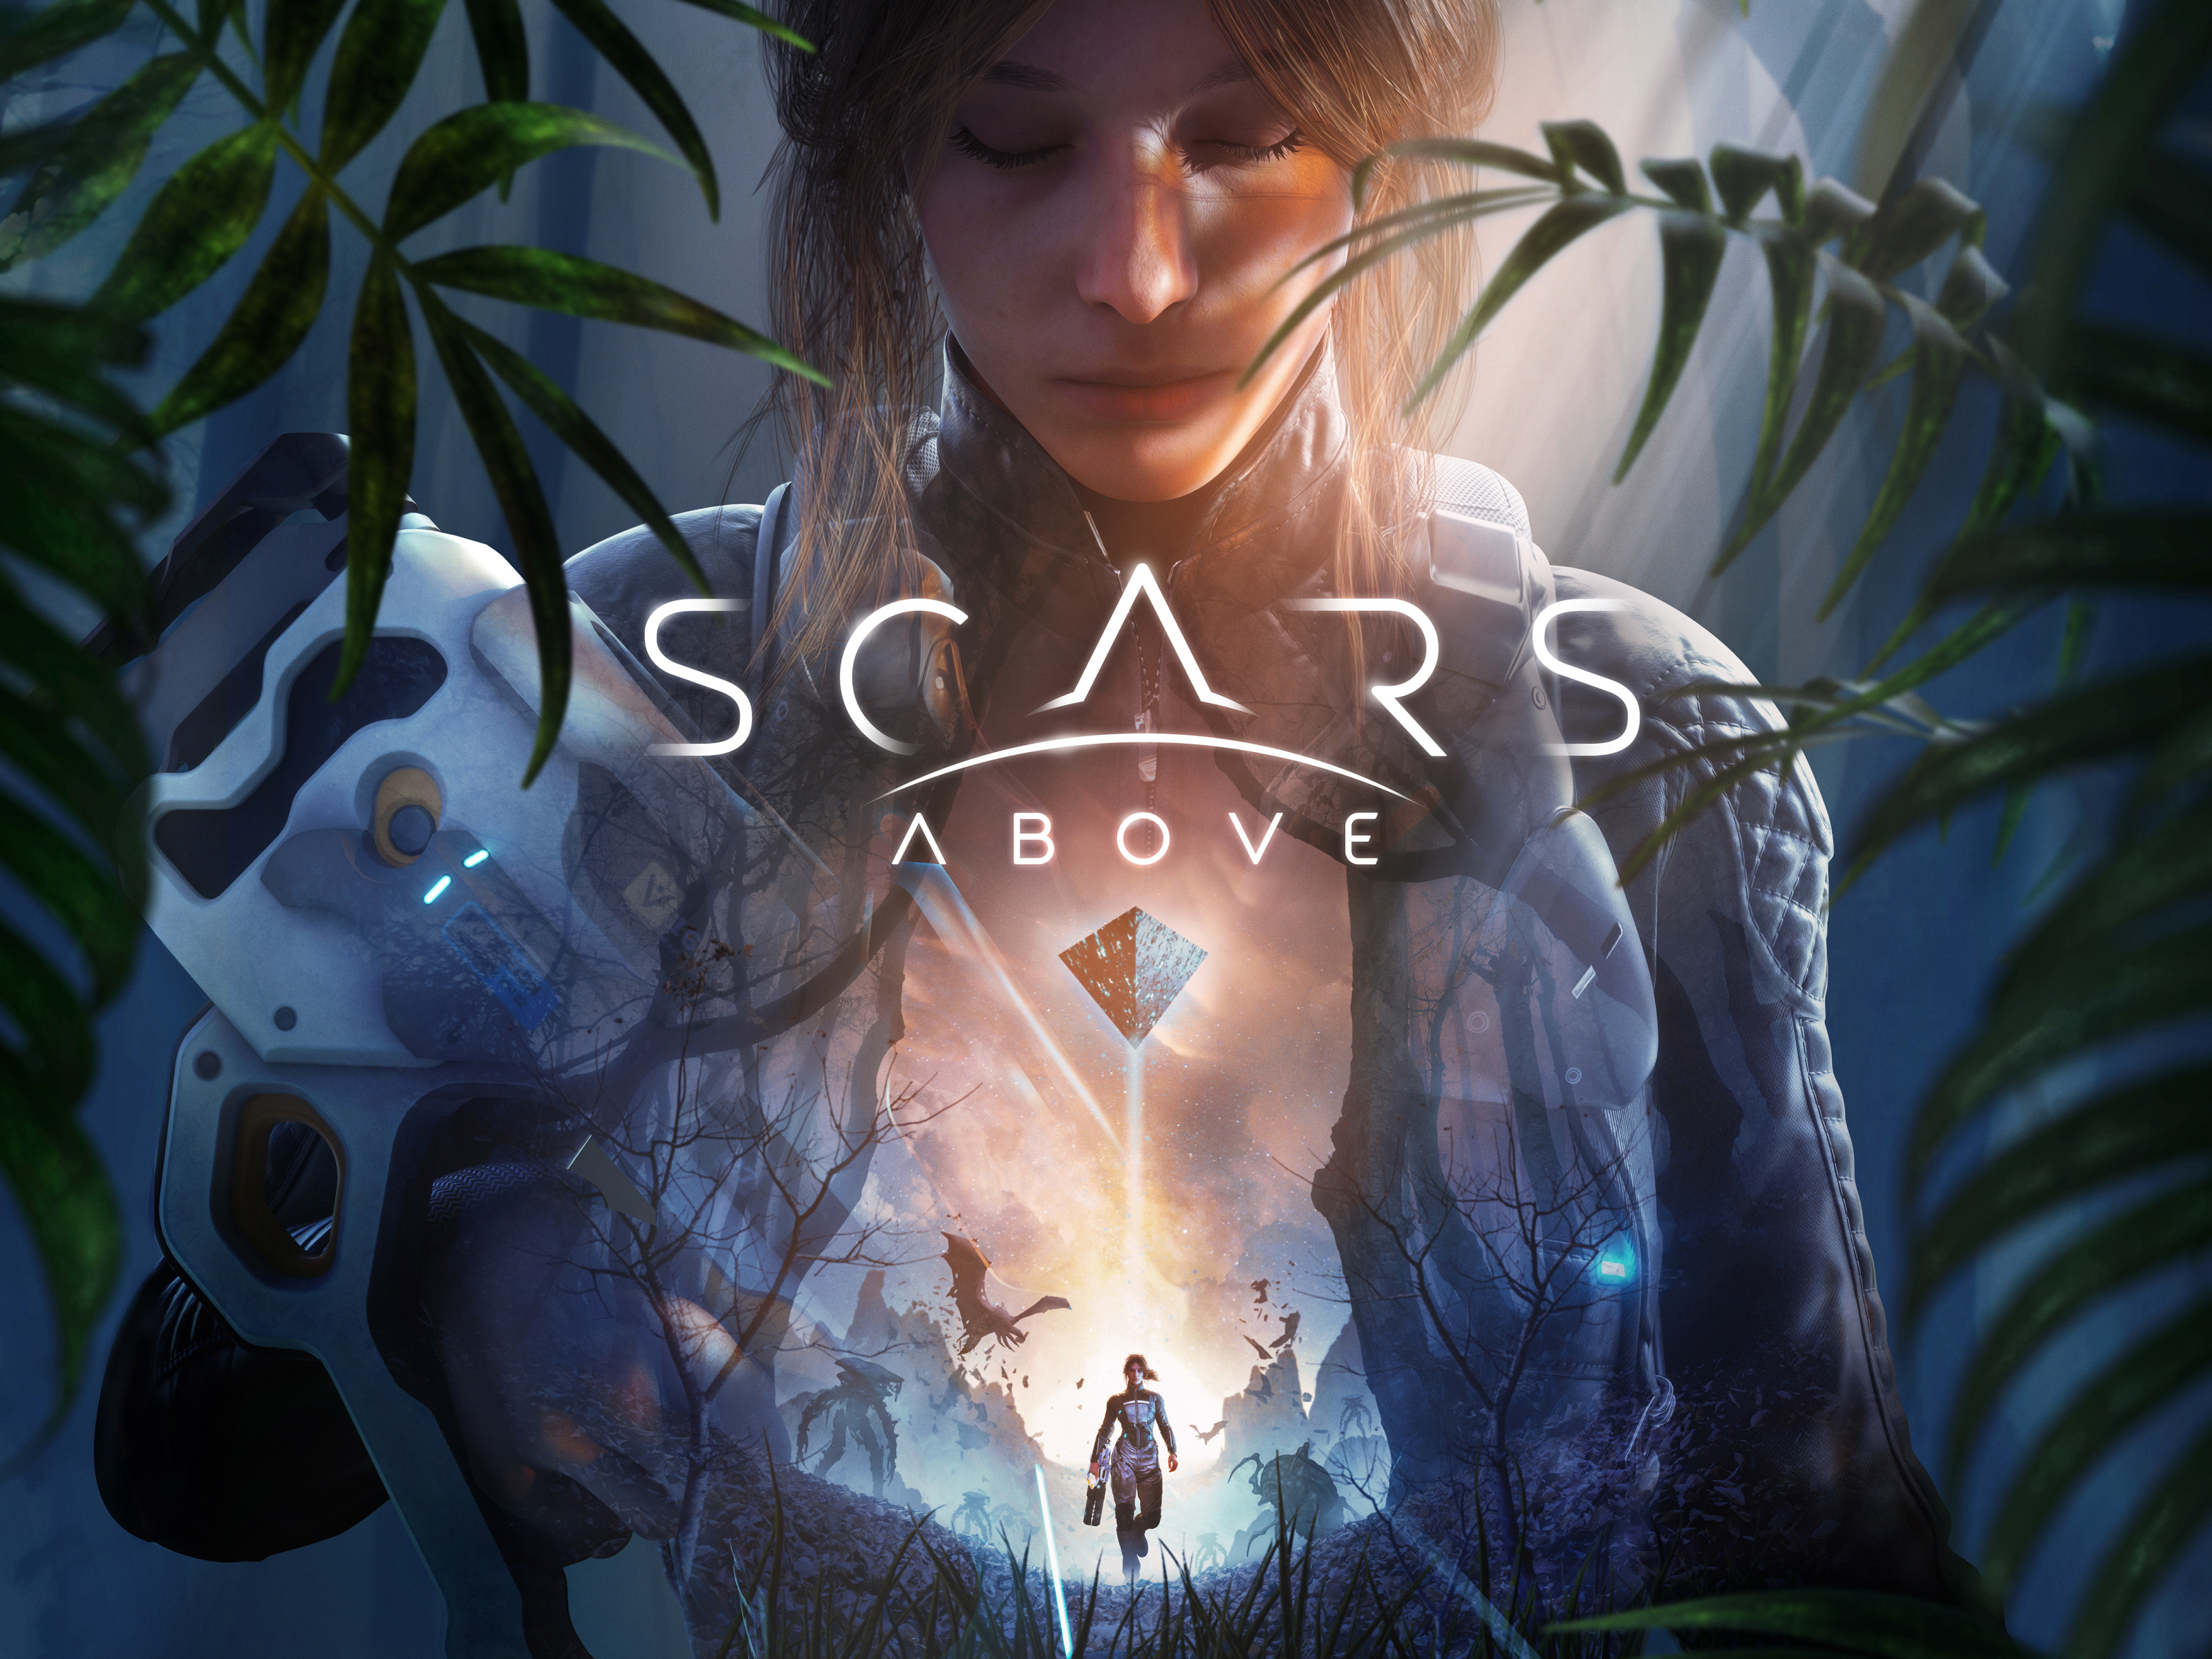 Above games. Scars above. Scar игра. Scars above ps4. Scars above Steam.